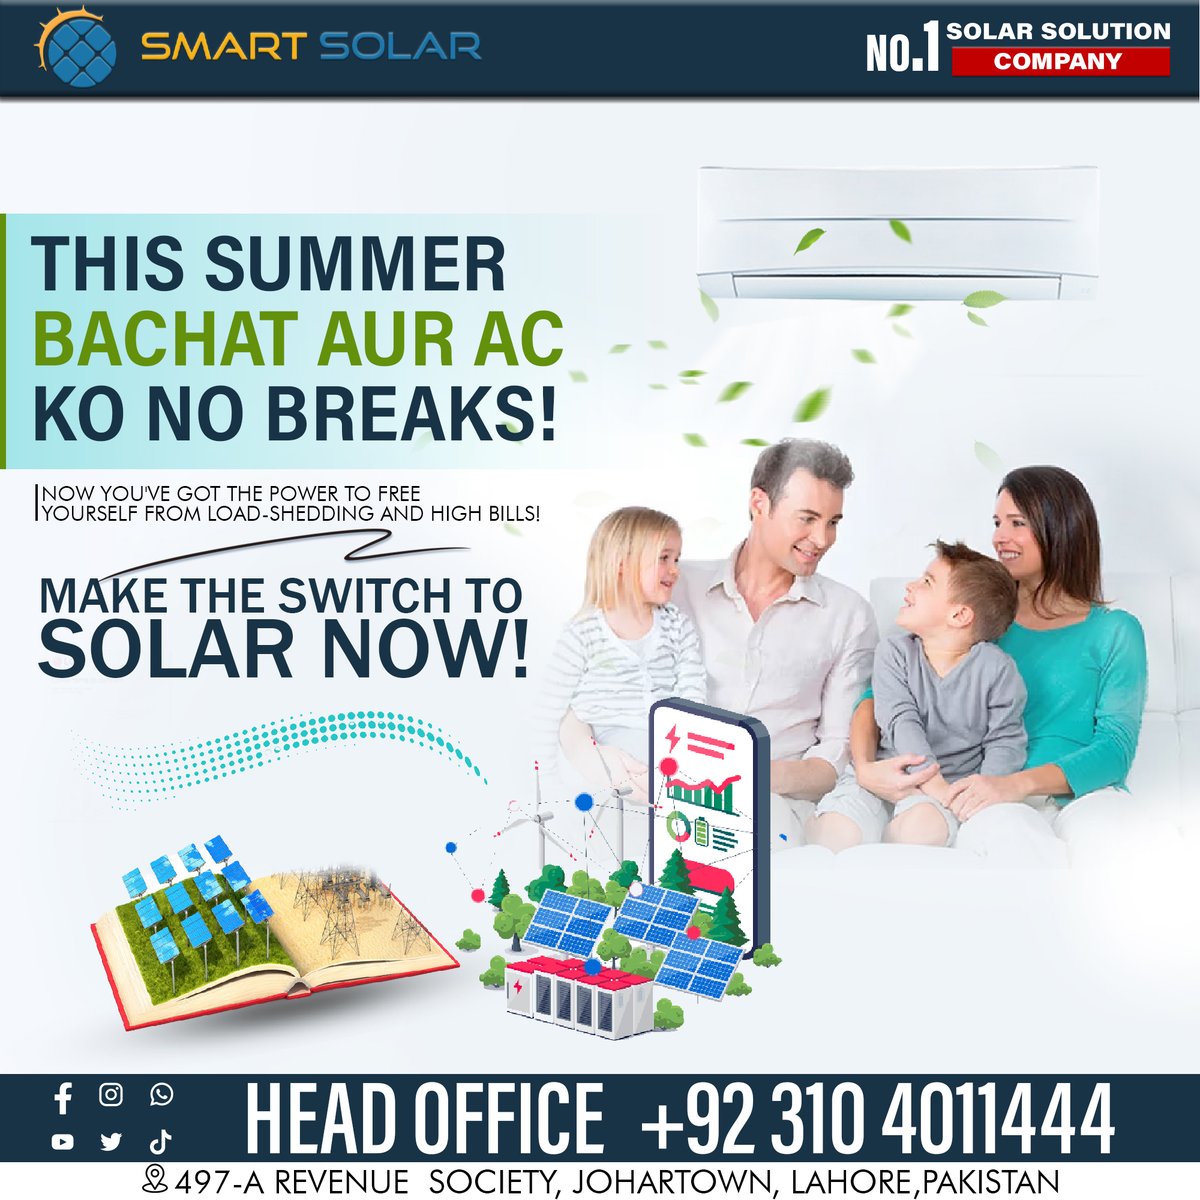 Energy Solutions for Residential & Commercial users! For more details please contact 0311-4011444 #SmartSolar #Solar #SolarPanels #SolarBatteries #SolarInverters #SolarInstallation #SolarHeater